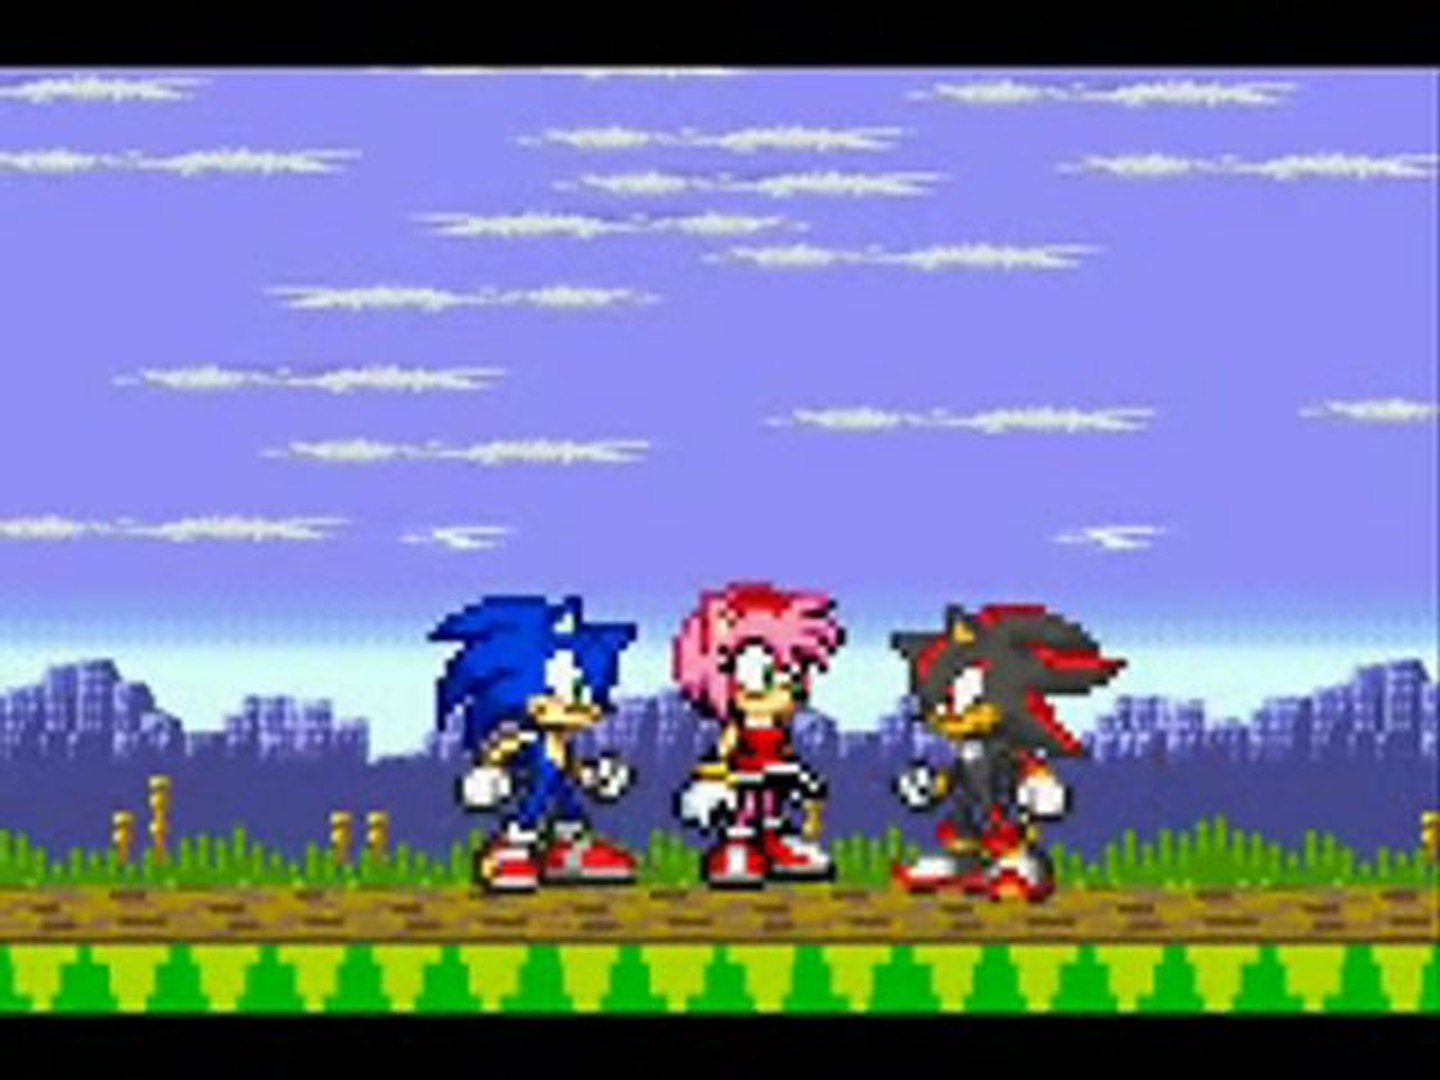 Sonic 2 XL - Sonic, Shadow and Amy Sprites by LowShengSusanHong